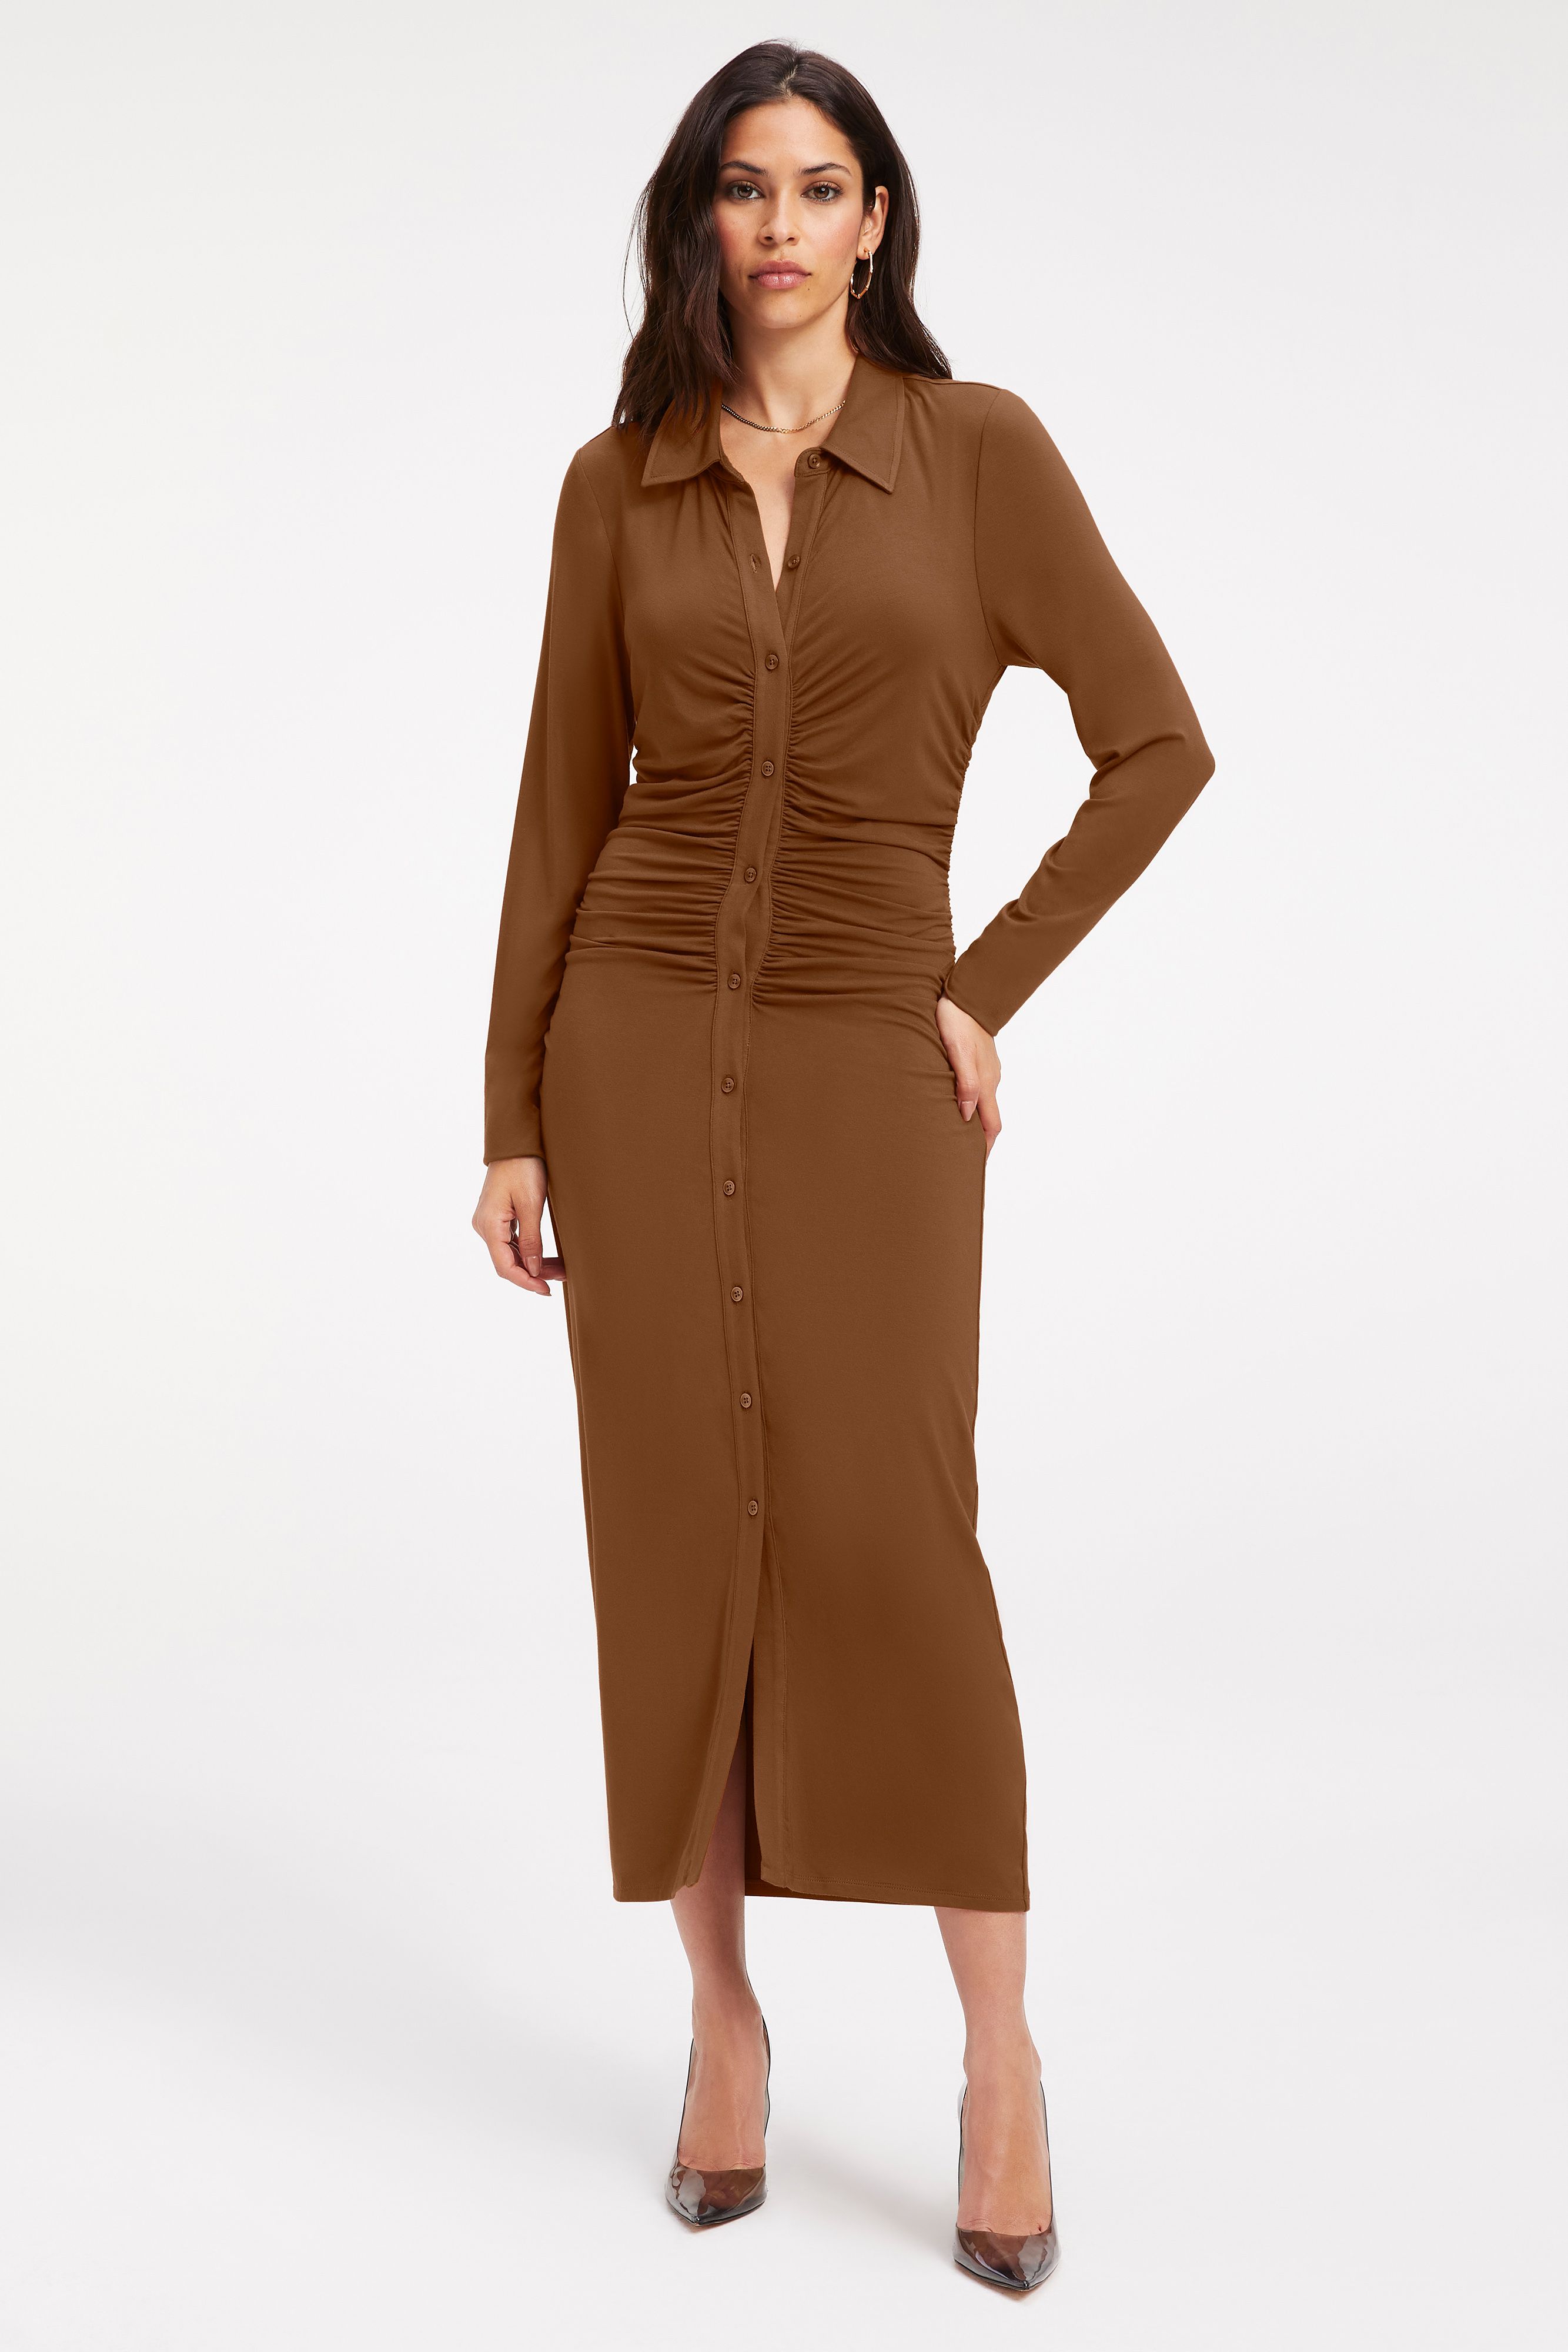 GOOD TOUCH BUTTON FRONT MIDI | BURNT CARAMEL002 | Good American